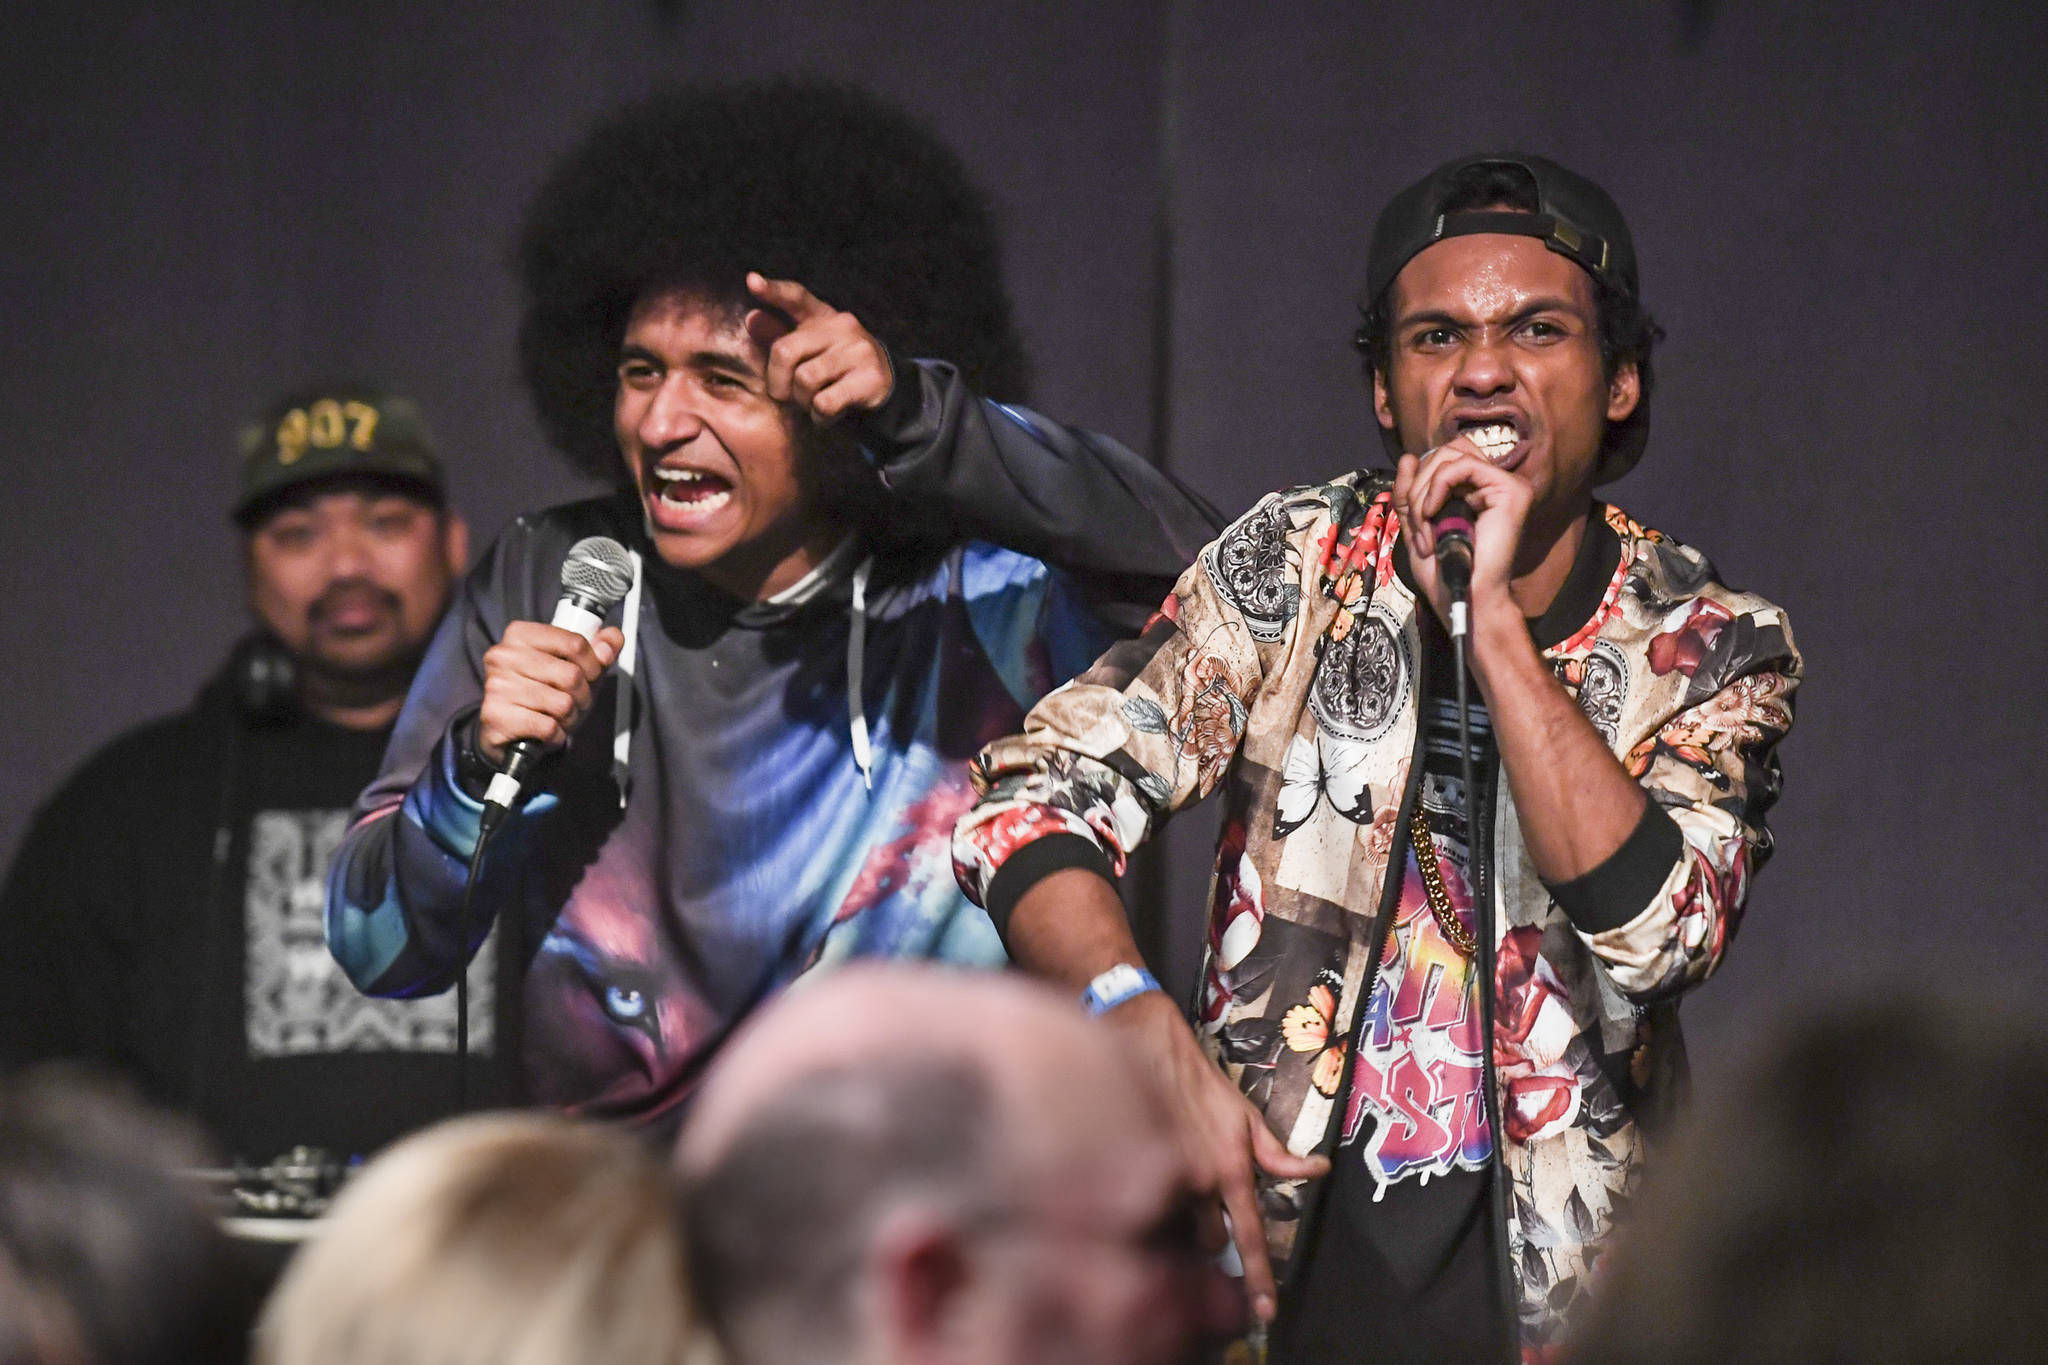 Arias Hoyle, left, and Chris Talley perform during the Killah Priest of Wu Tang Southeast Tour at the Juneau Arts & Culture Center on Friday, Dec. 20, 2019. (Michael Penn | Juneau Empire)